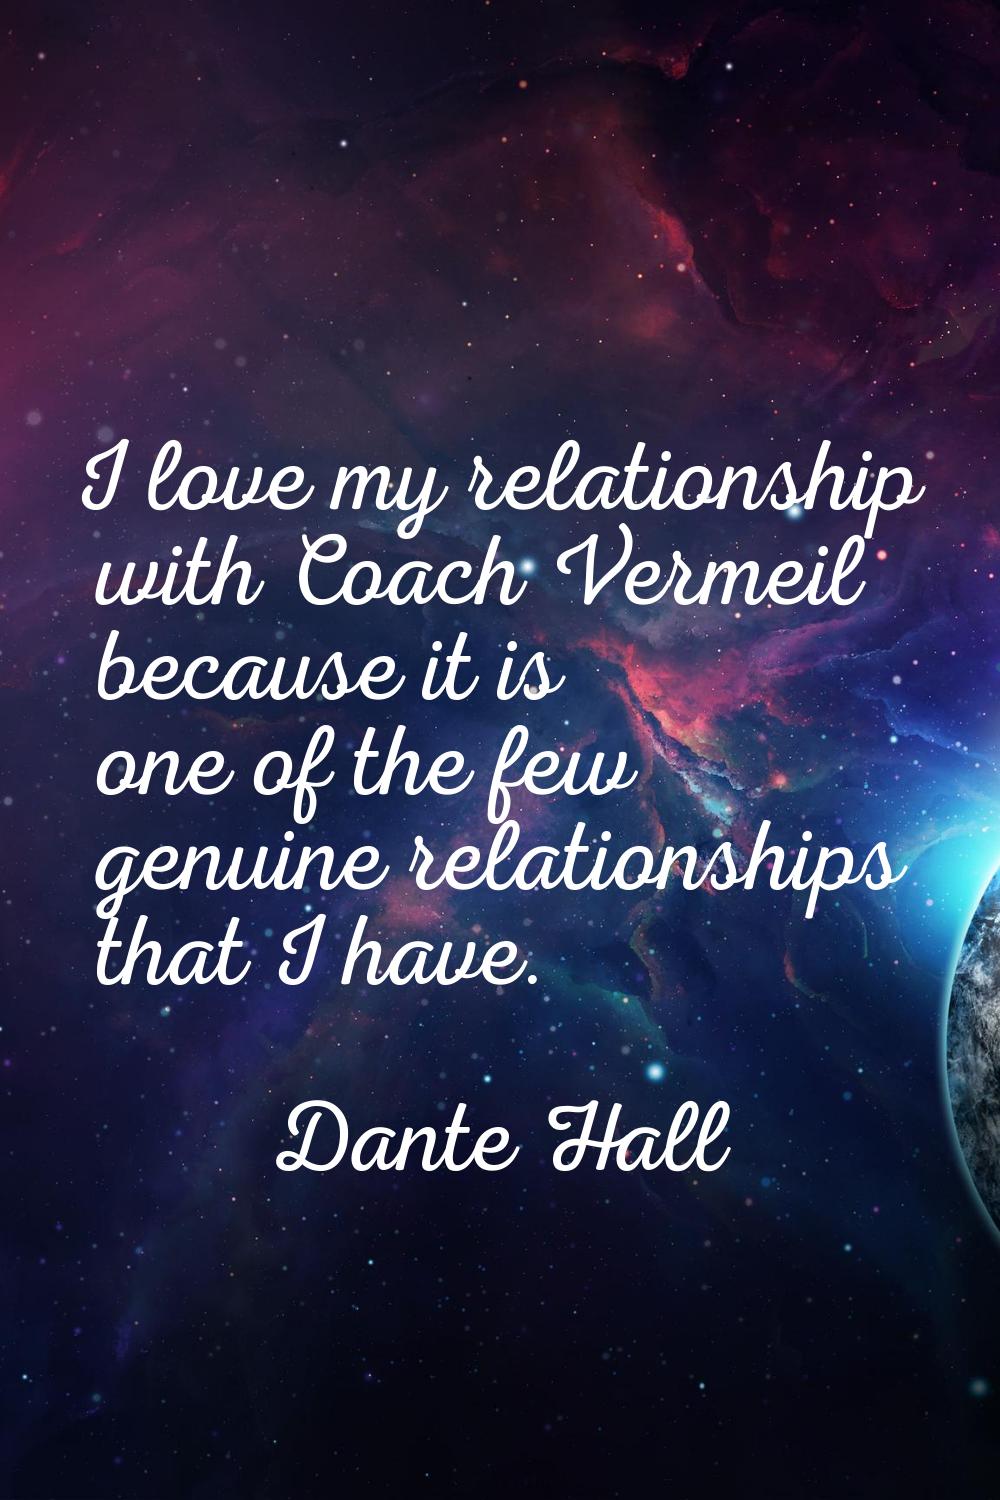 I love my relationship with Coach Vermeil because it is one of the few genuine relationships that I